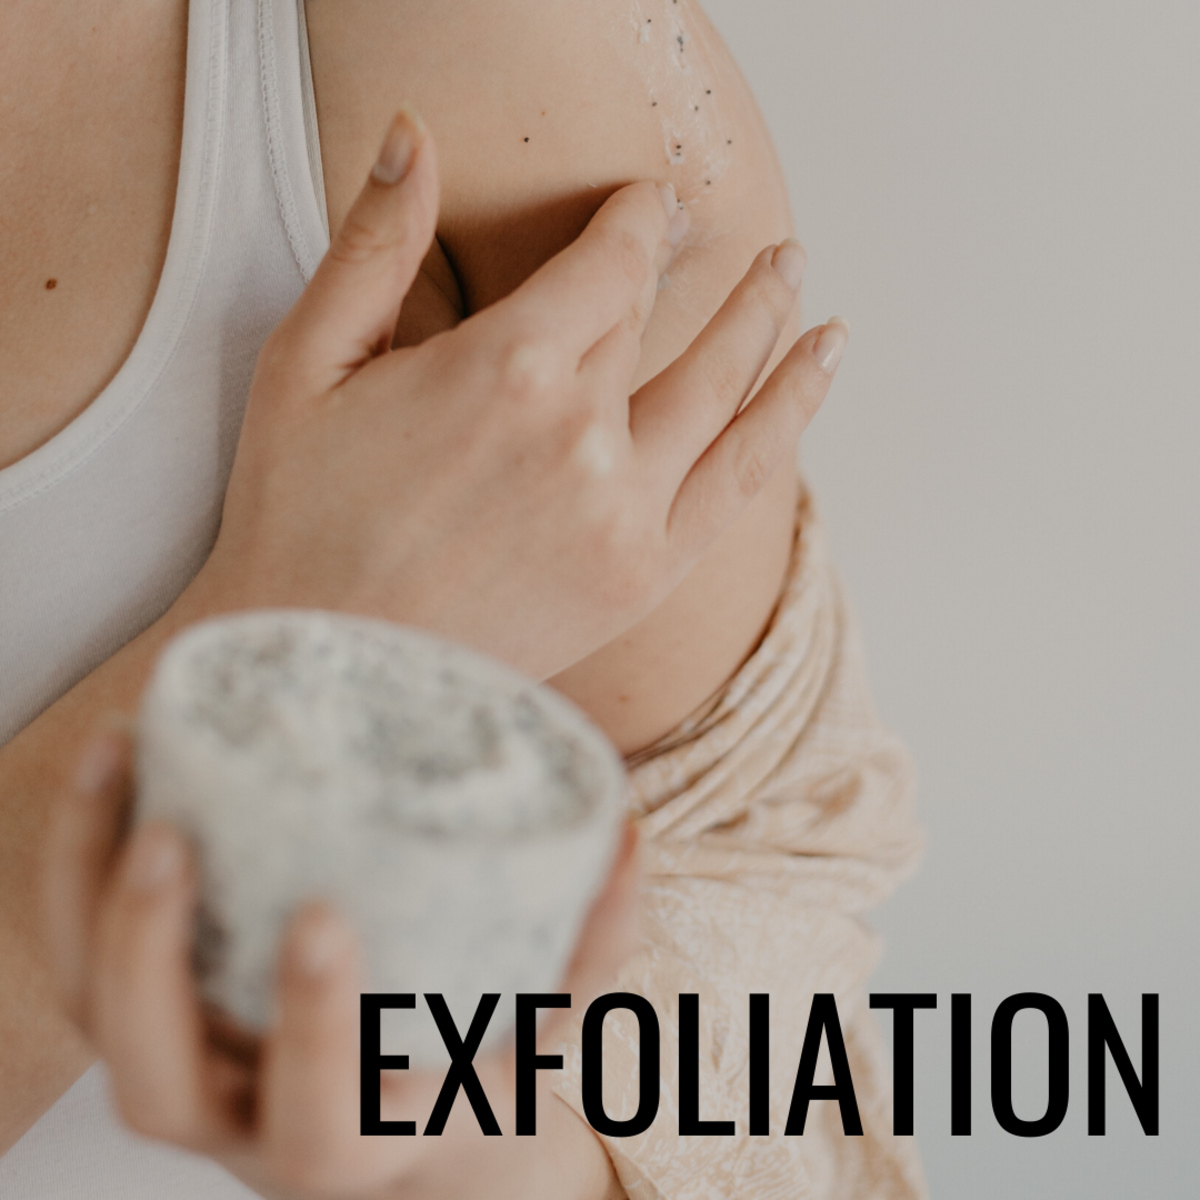 Exfoliation is easy to add to your nighttime routine.